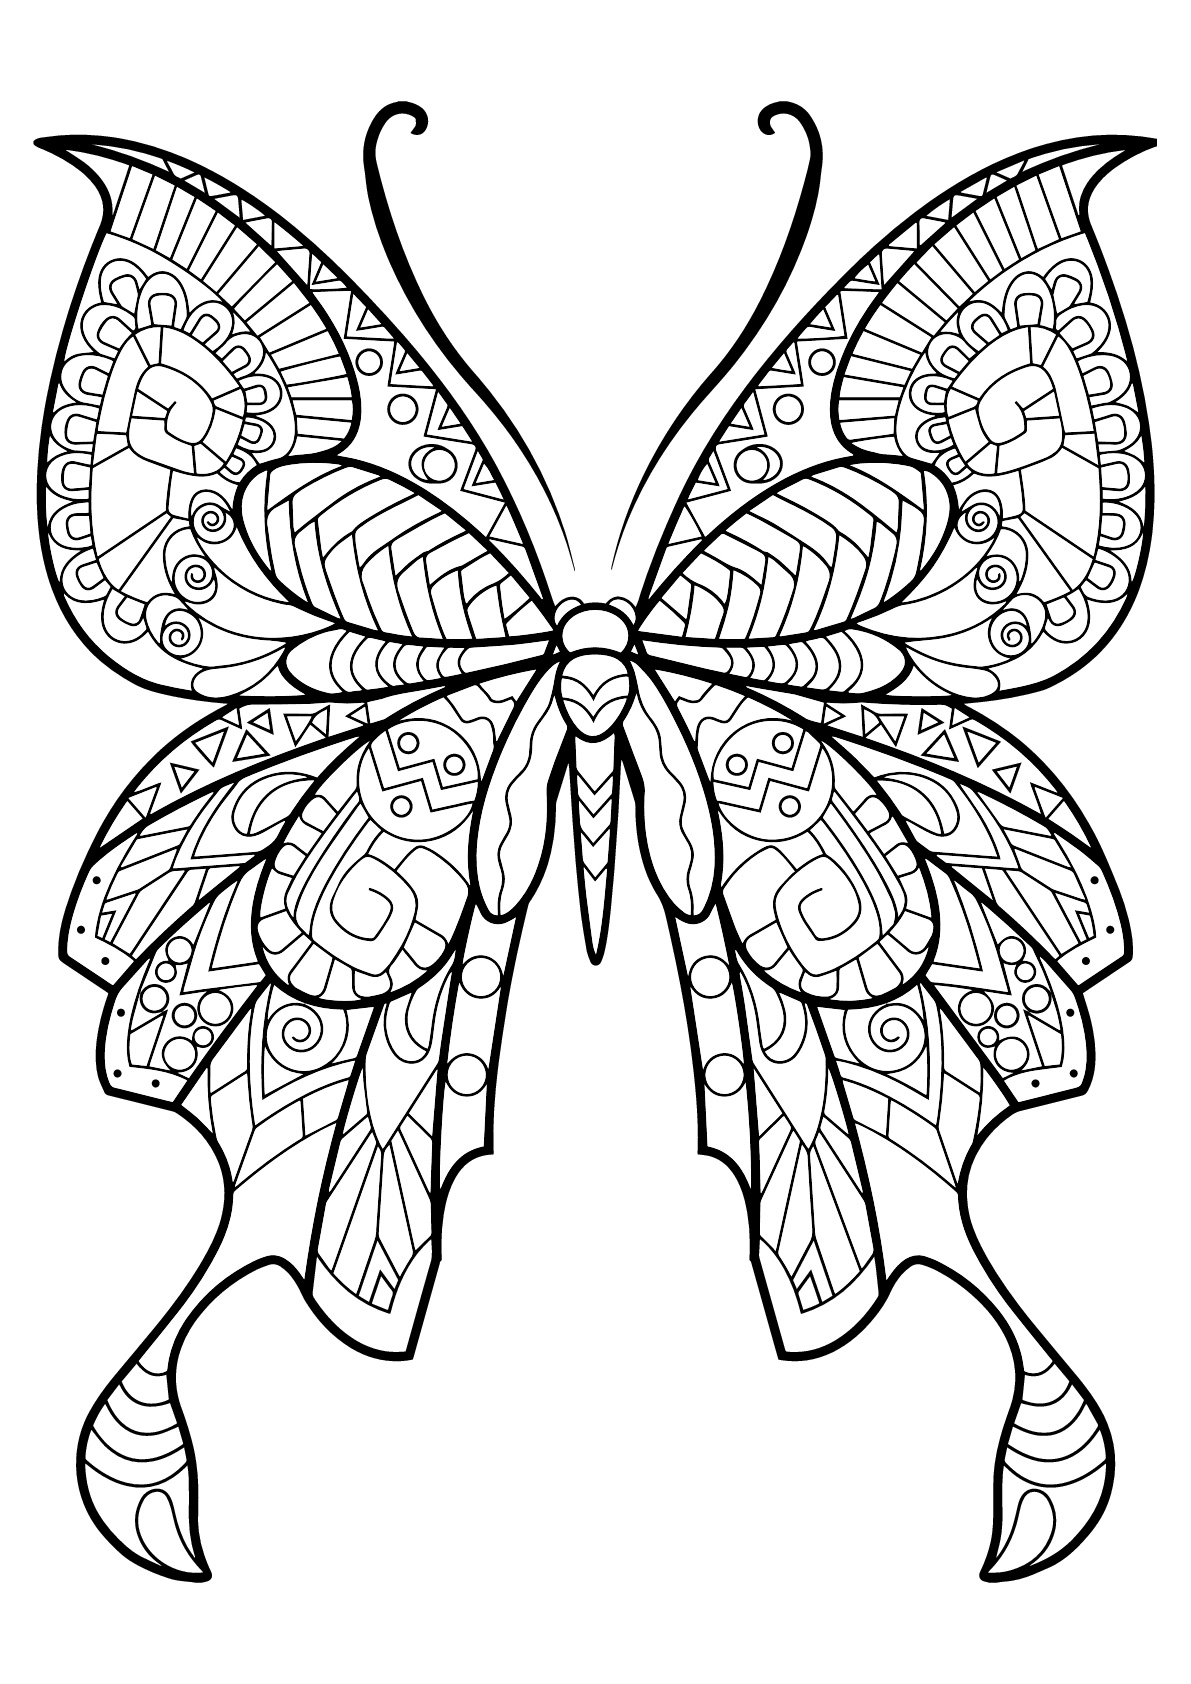 Simple Butterflies coloring page for children